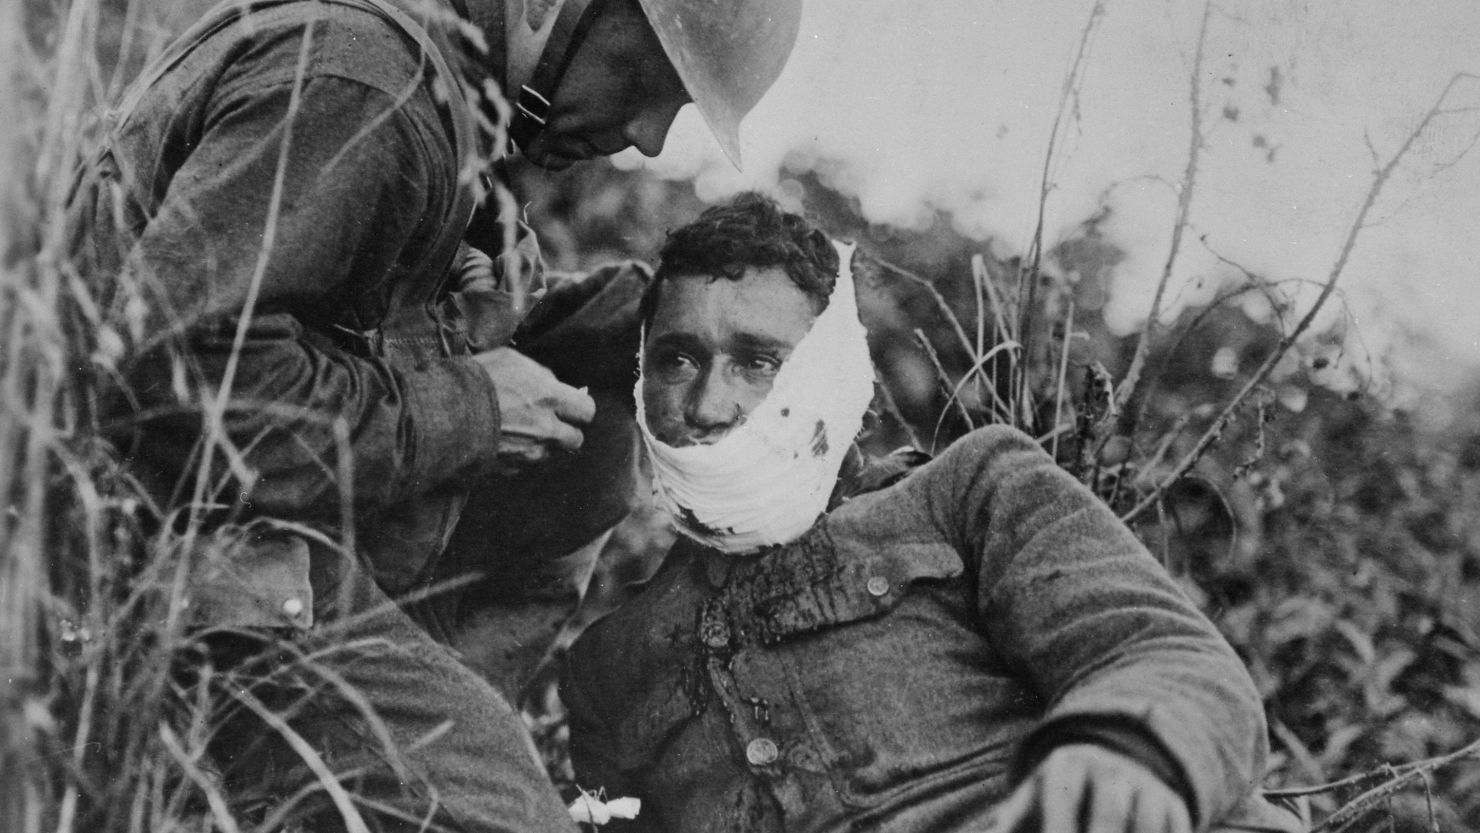 A US soldier treats a comrade's wound in France in 1918. World War I changed the US in ways that linger. 